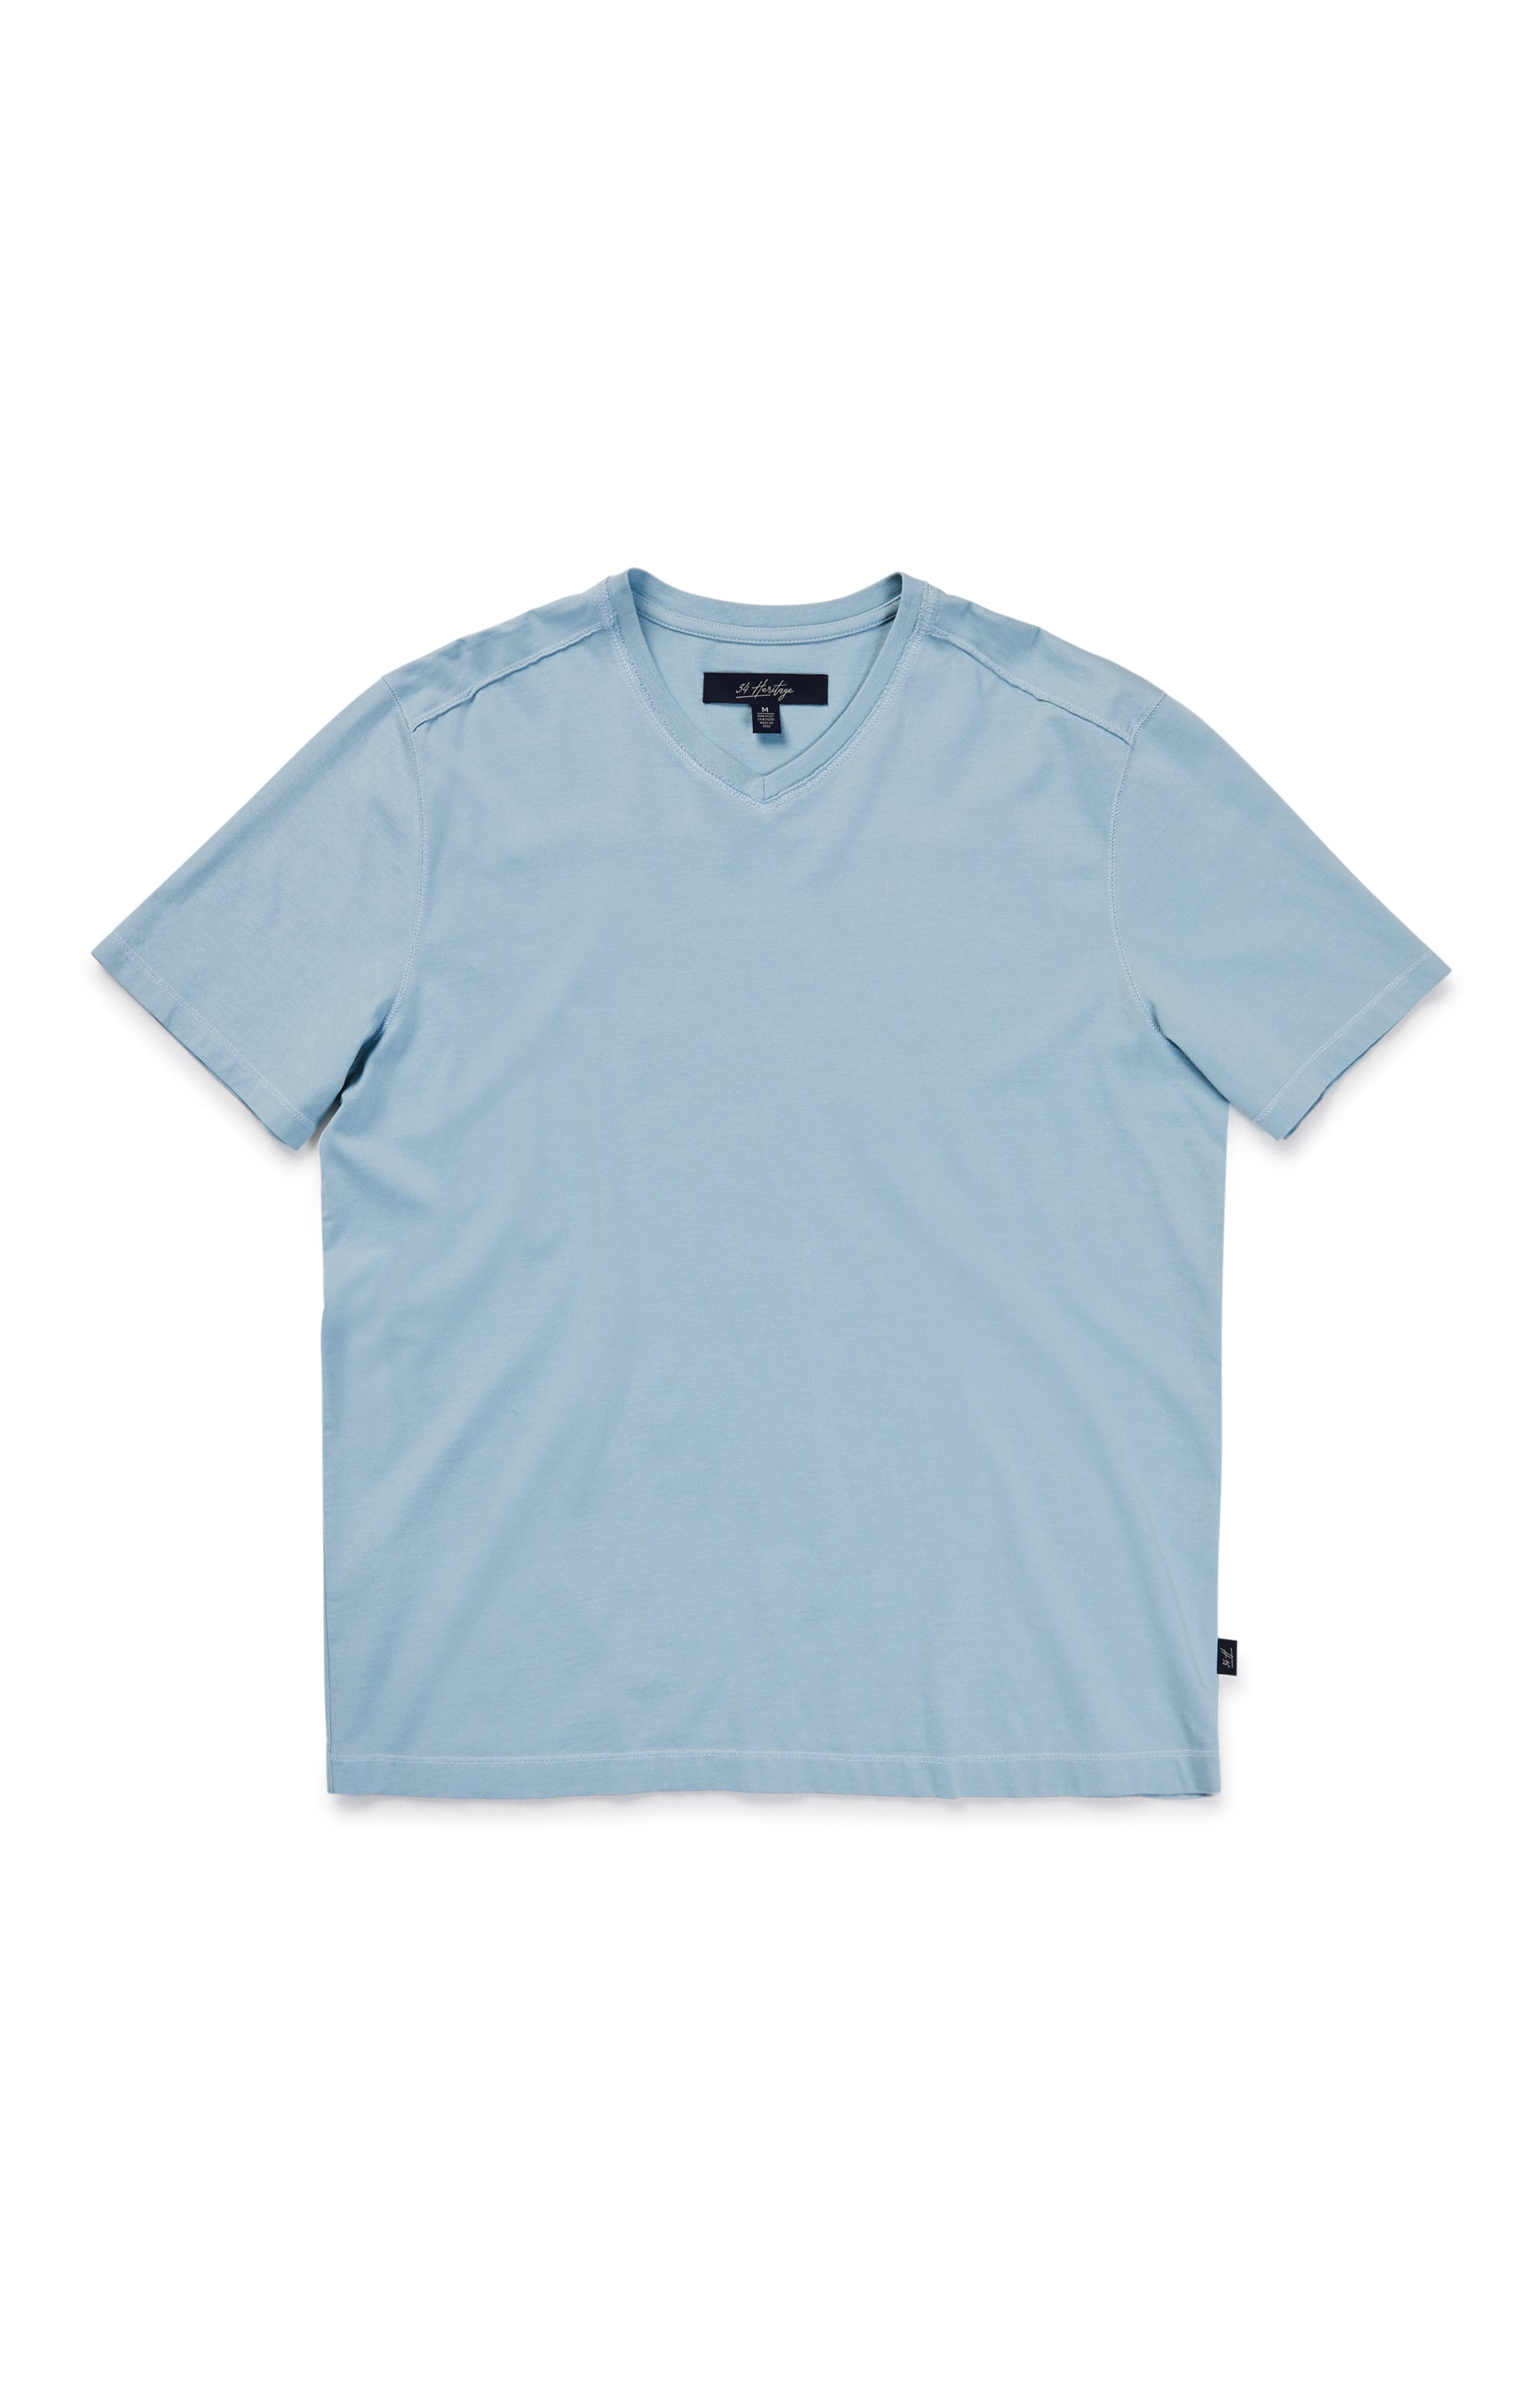 Deconstructed V-Neck T-Shirt in Forget-Me-Not Image 7